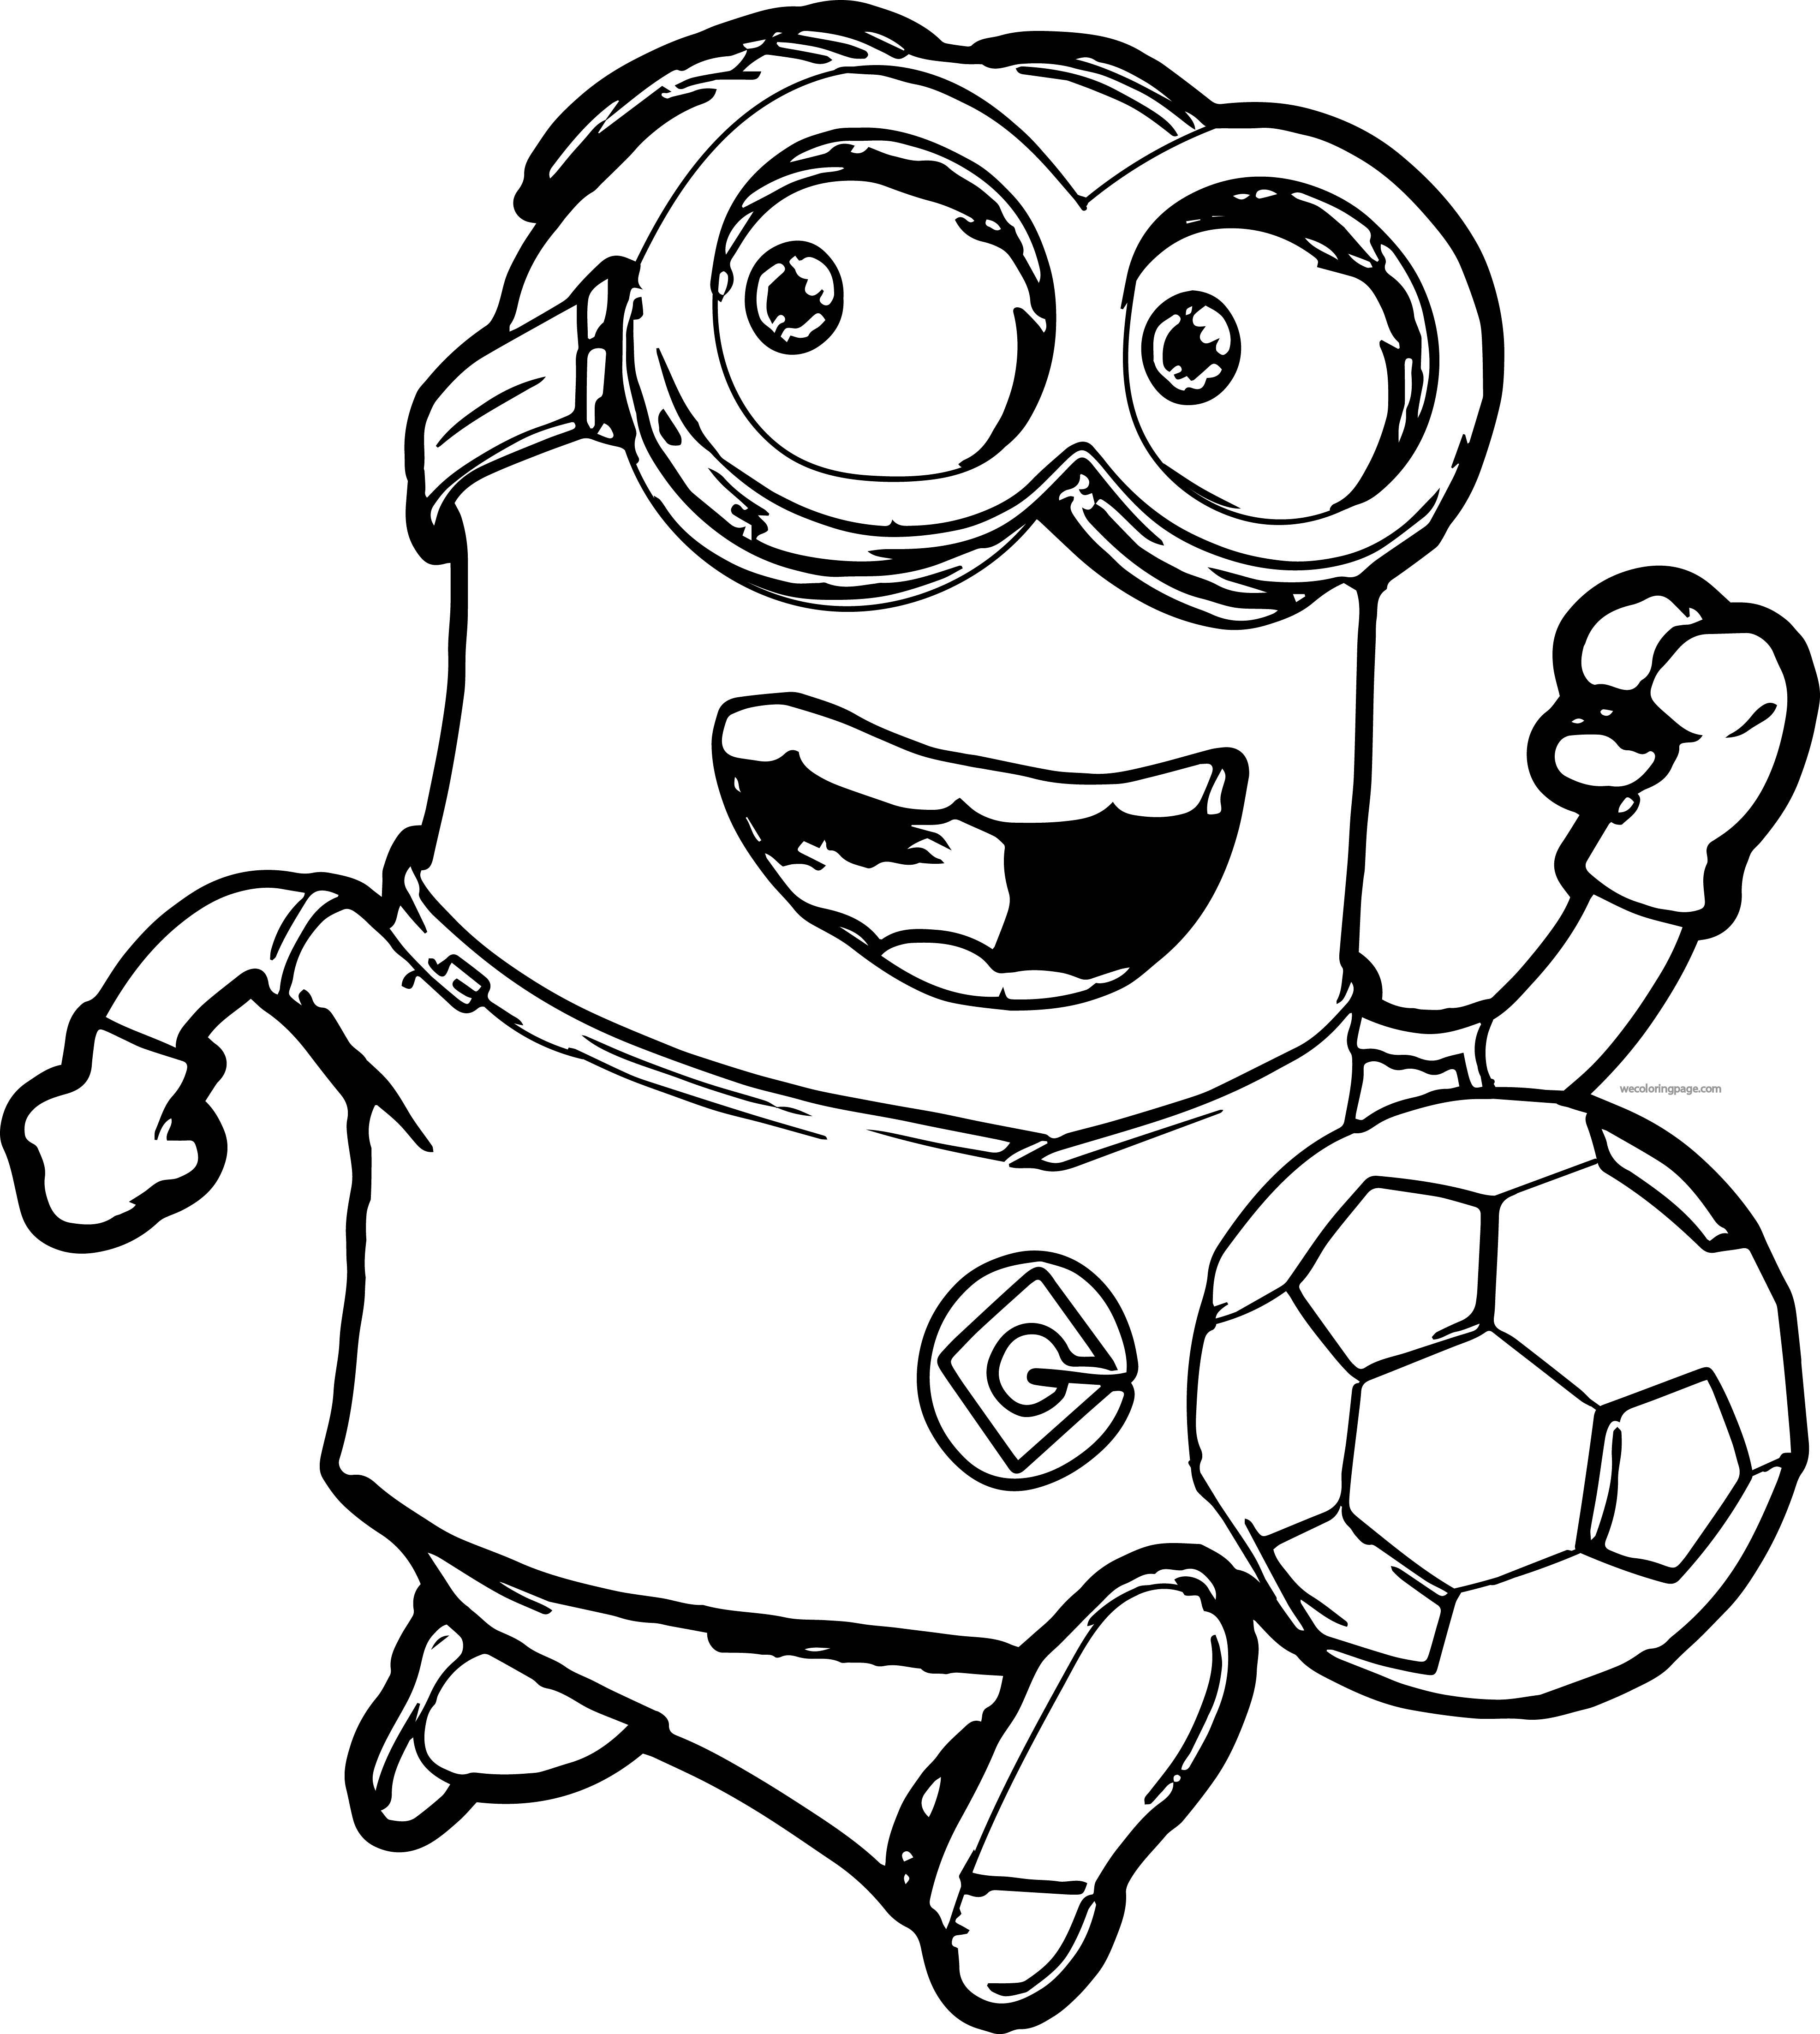 Coloring Pages For Boys Soccer
 Minion Soccer Player Coloring Pages